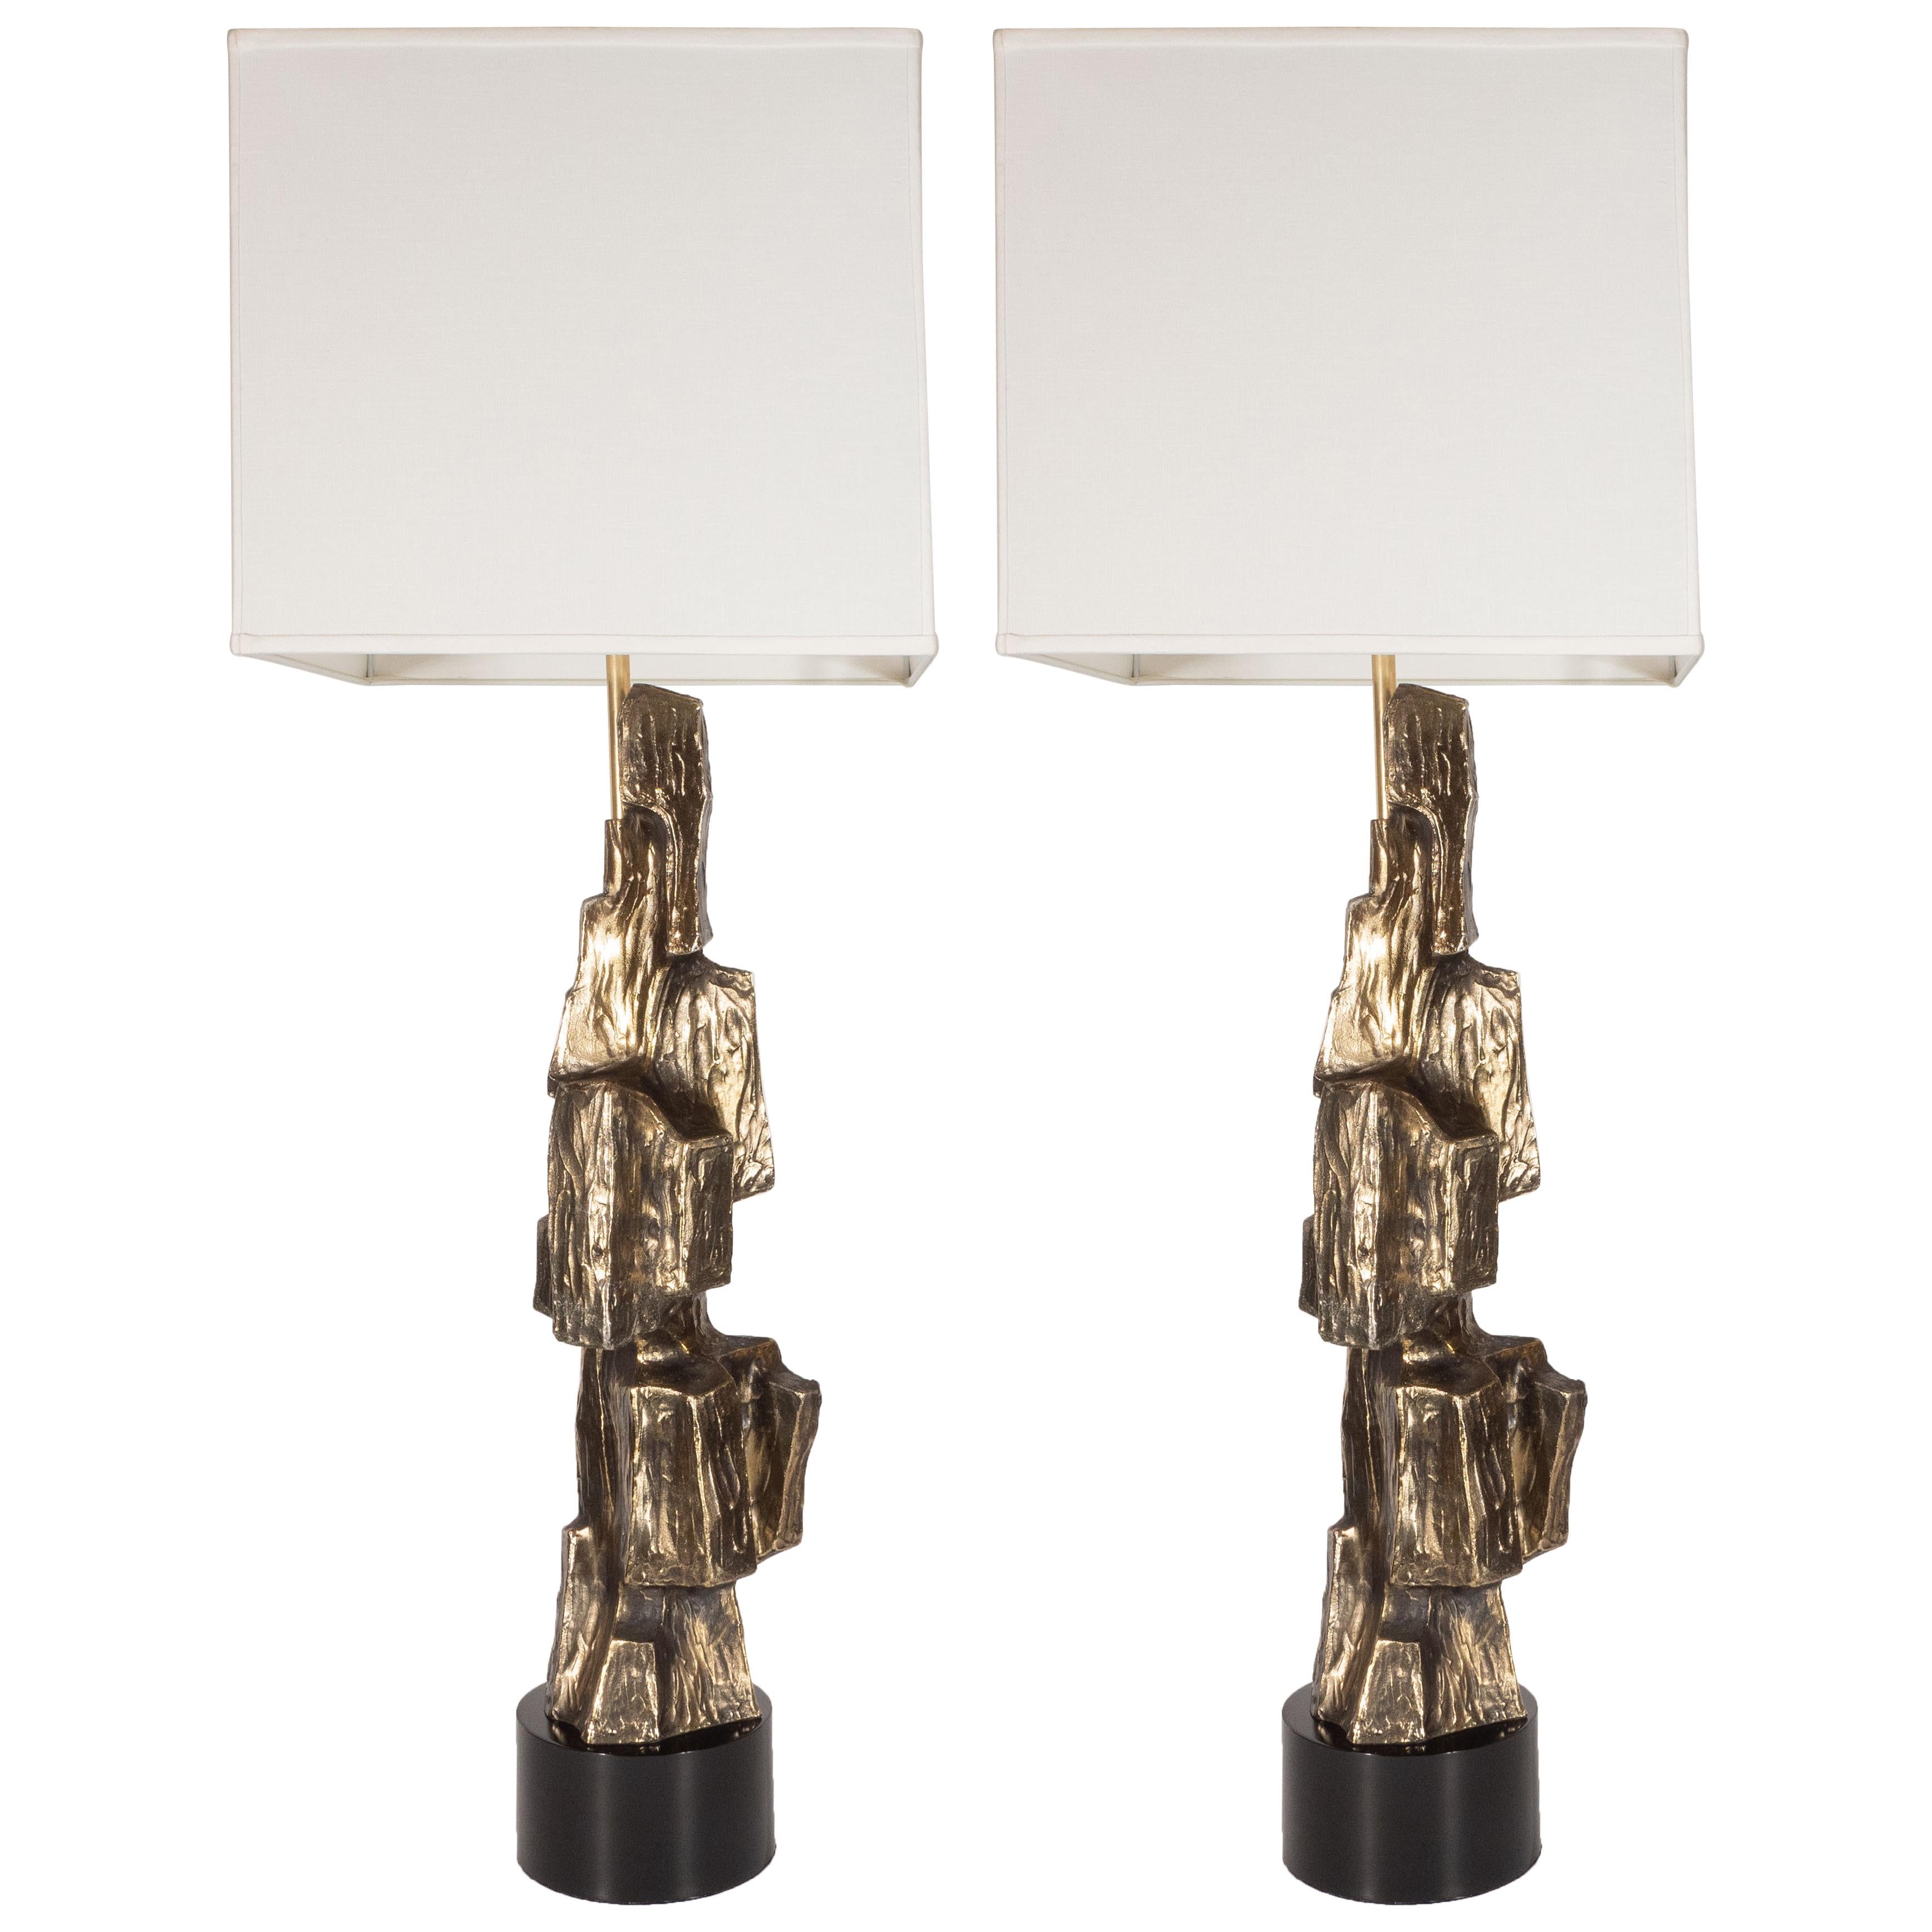 Pair of Mid-Century Modern Brutalist Bronze Lamps by Maurizio Tempestini